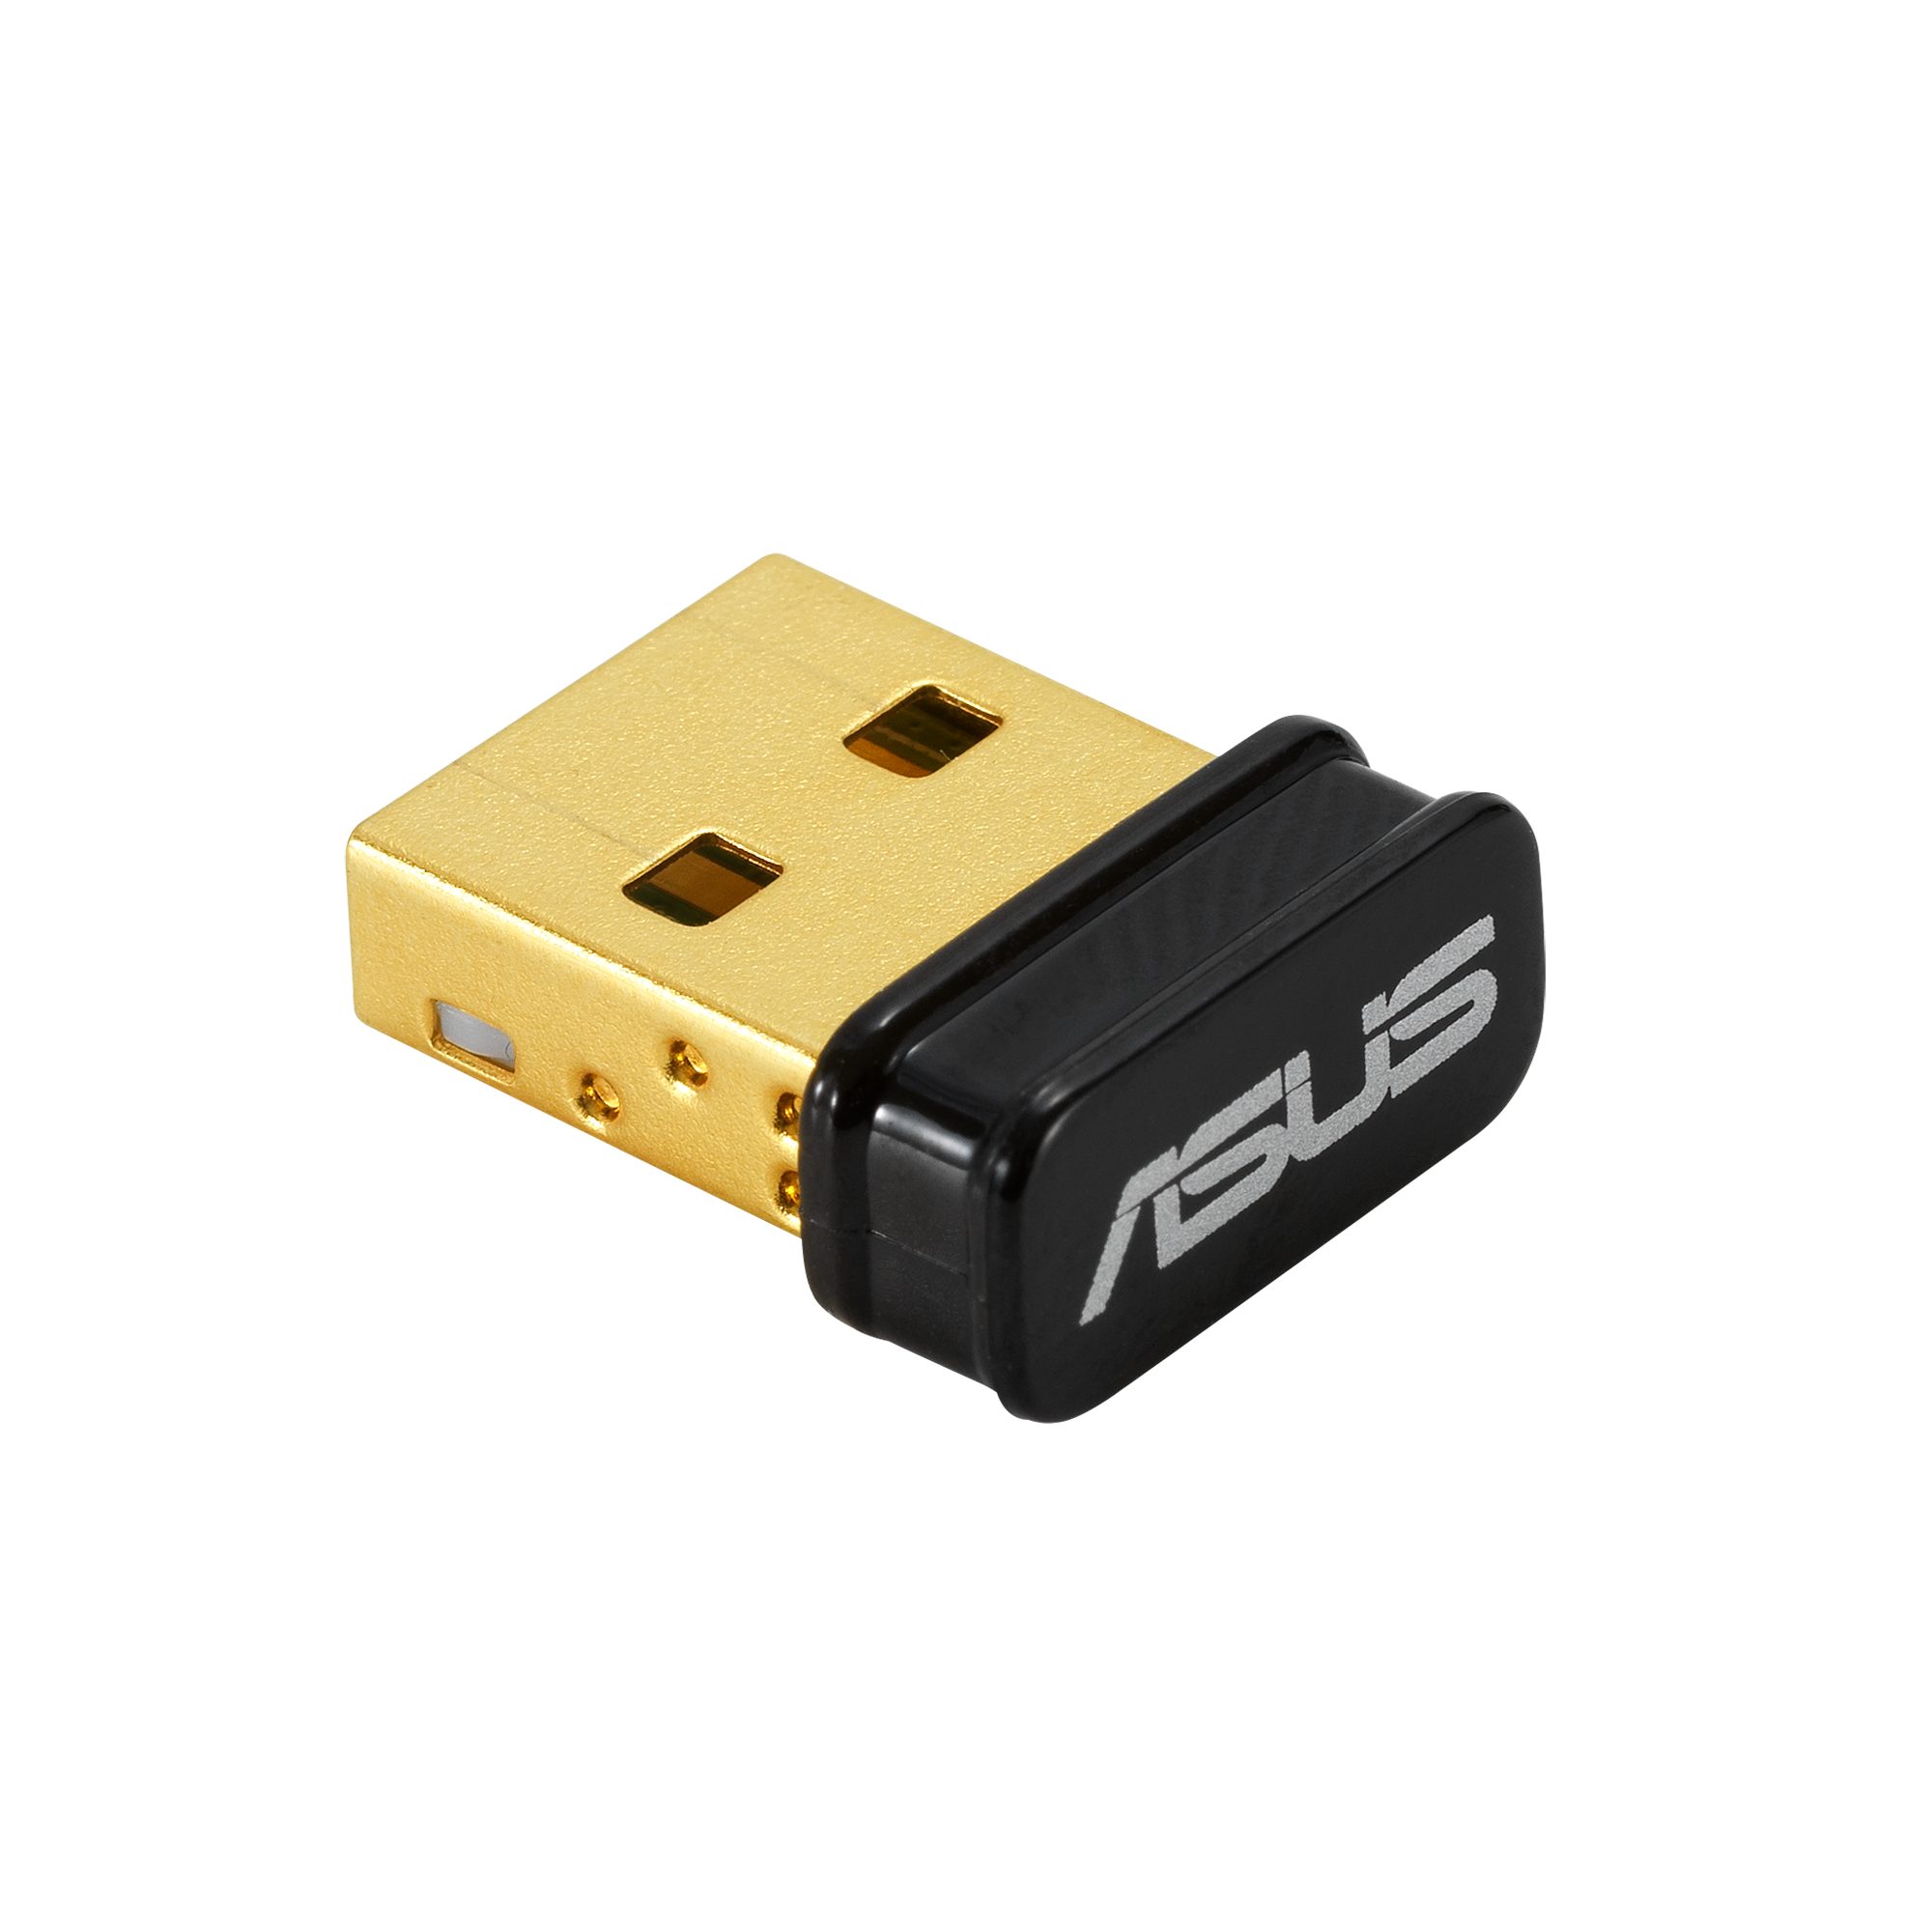 USB-BT500｜Wireless & Wired Adapters｜ASUS USA